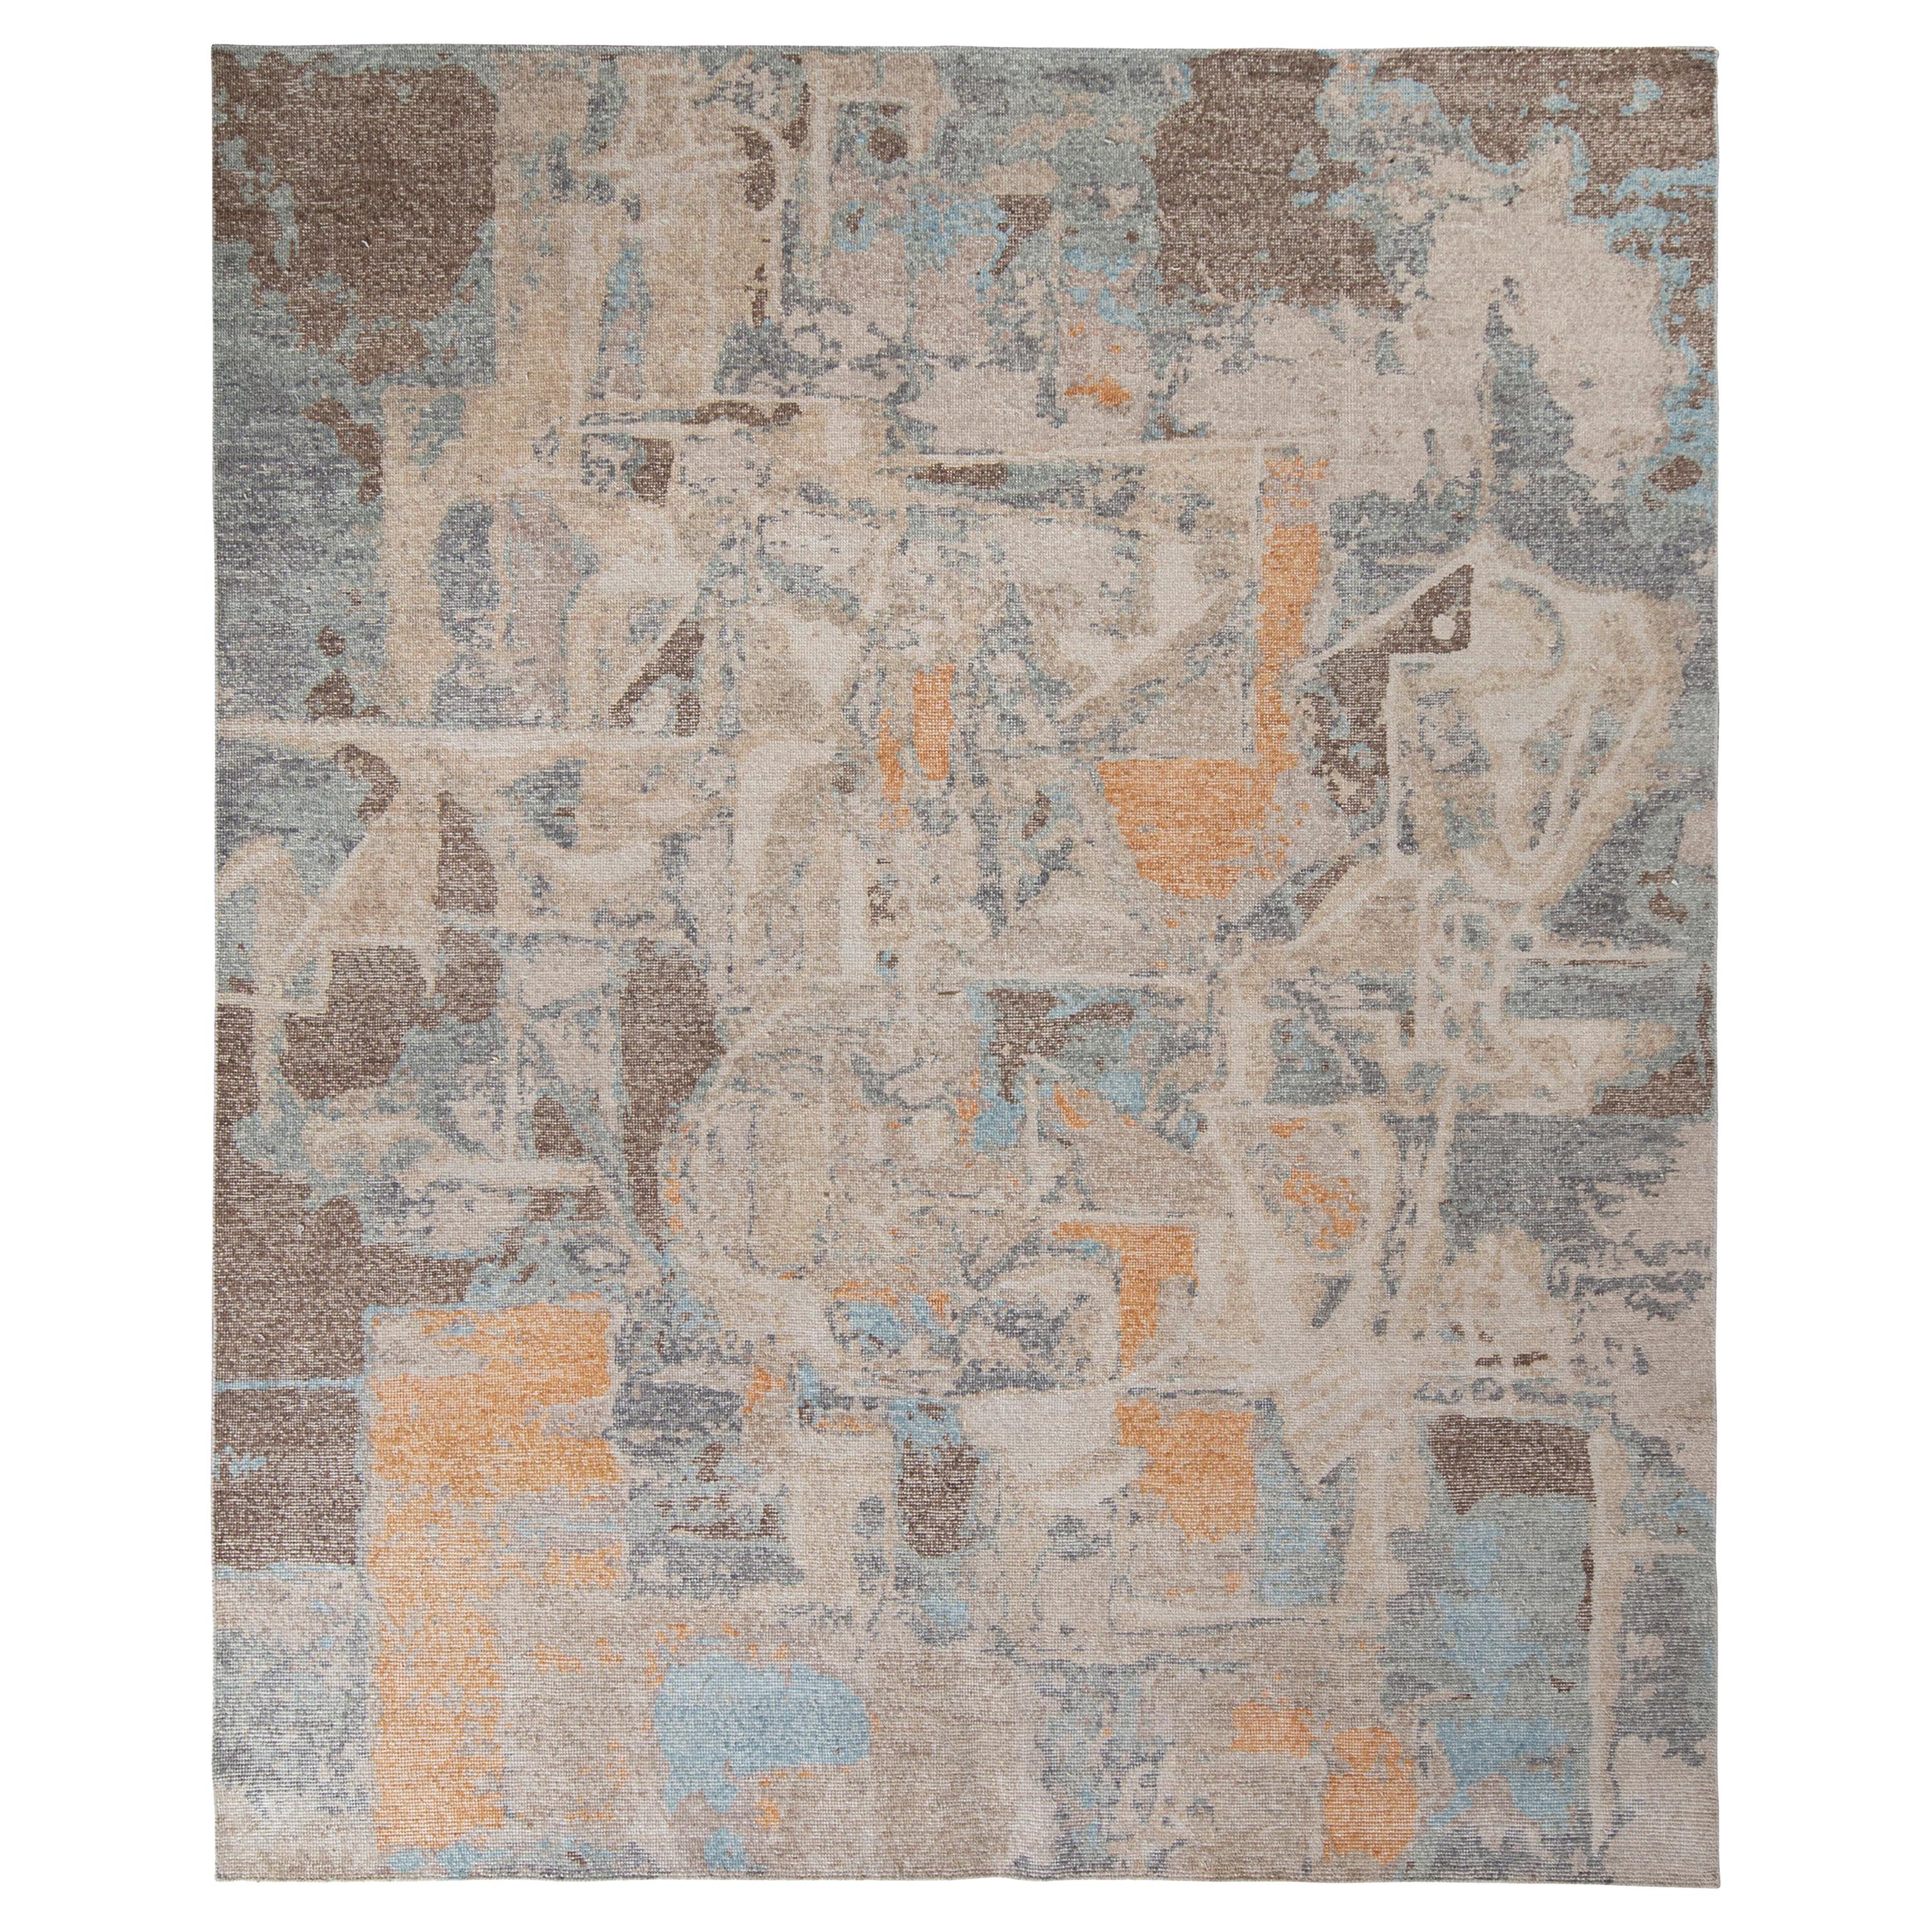 Rug & Kilim’s Distressed Abstract Rug in Beige-Brown and Blue Geometric Pattern